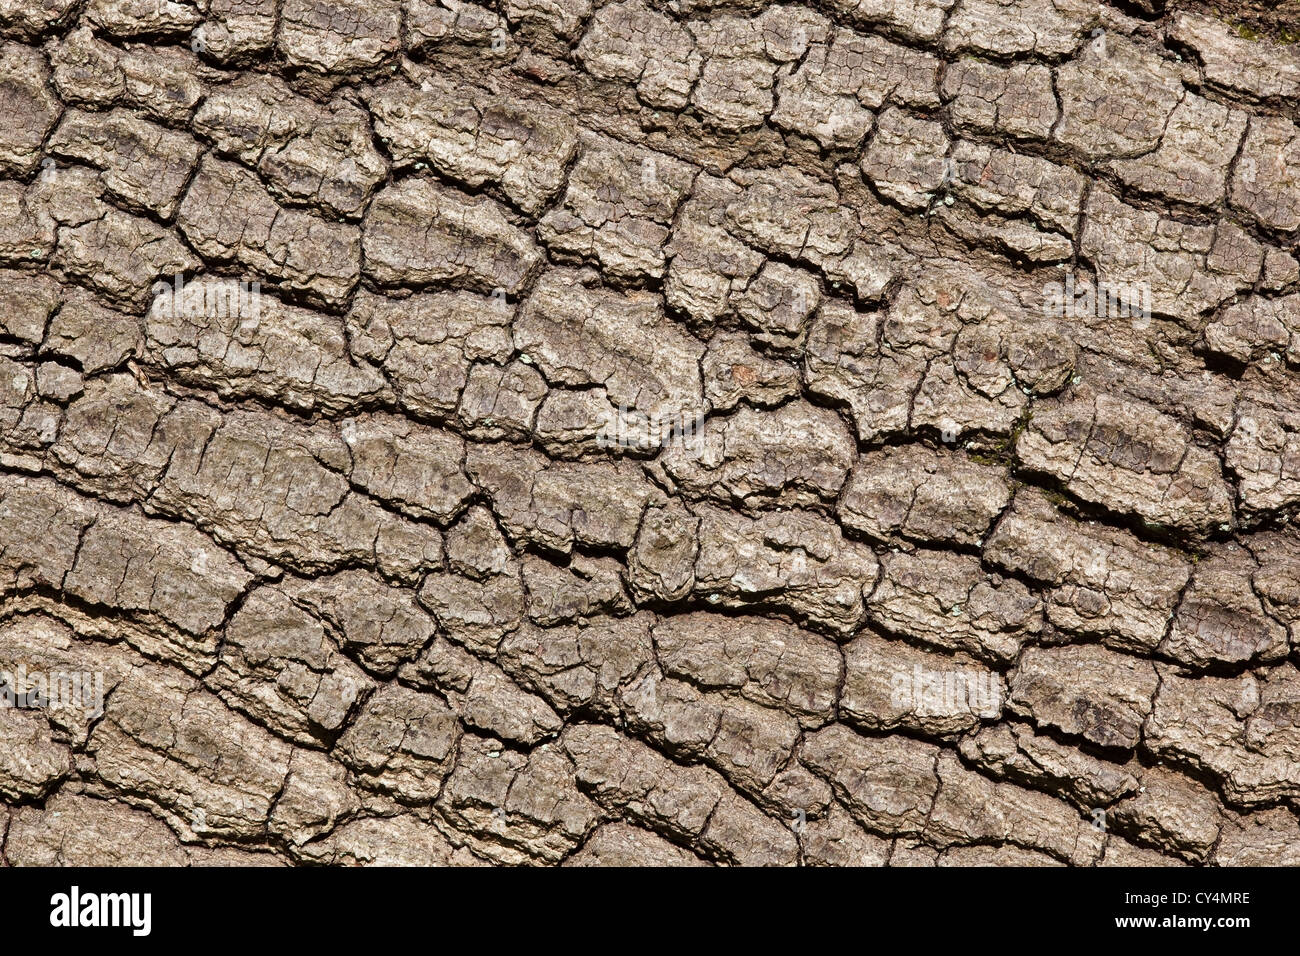 textured bark of a fallen oak tree for use as background Stock Photo